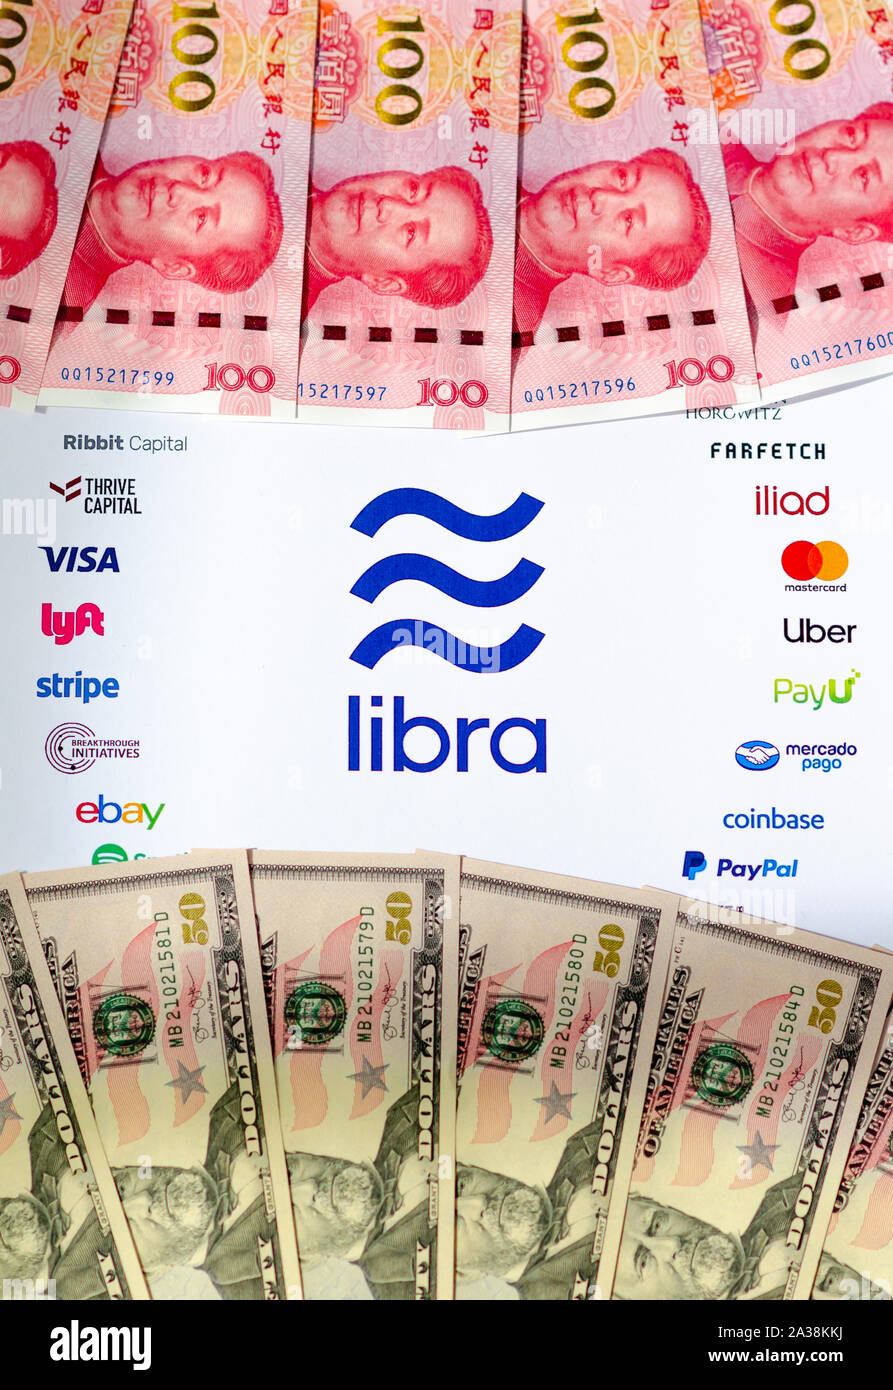 Stone, Staffordshire / UK - October 6 2019: Libra Association logo on a brochure with USD and CNY banknotes. Photo with selective focus. Stock Photo